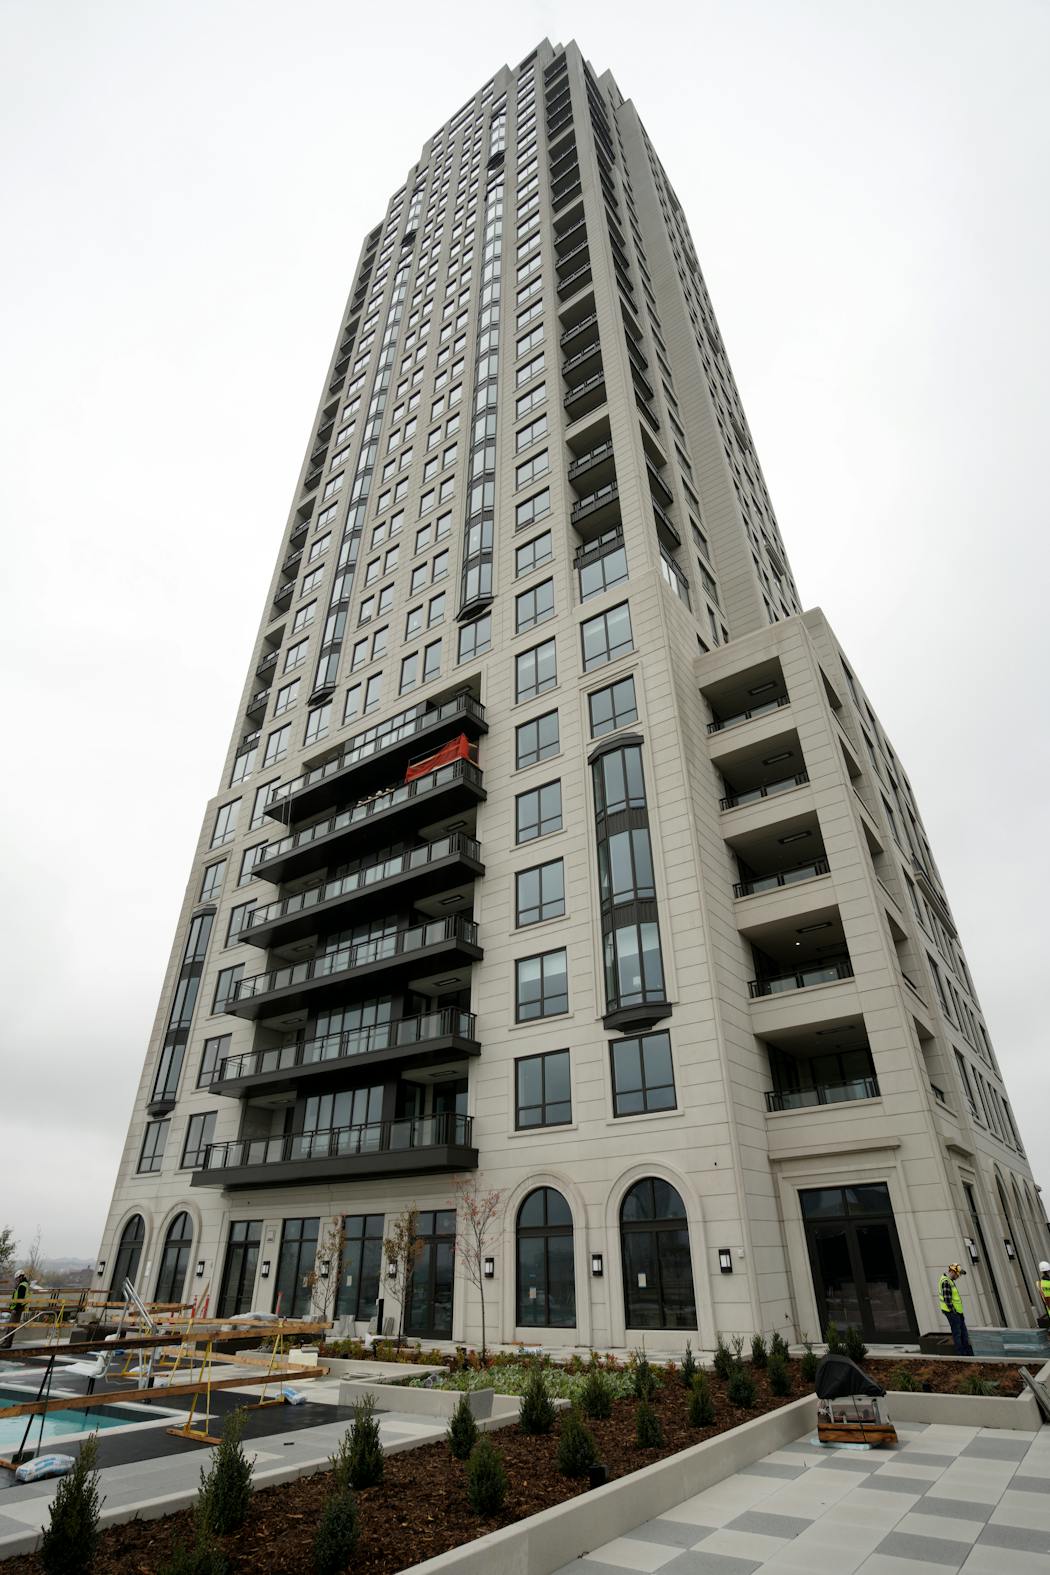 The 42-story Eleven on the riverfront is Minneapolis’ tallest residential building.